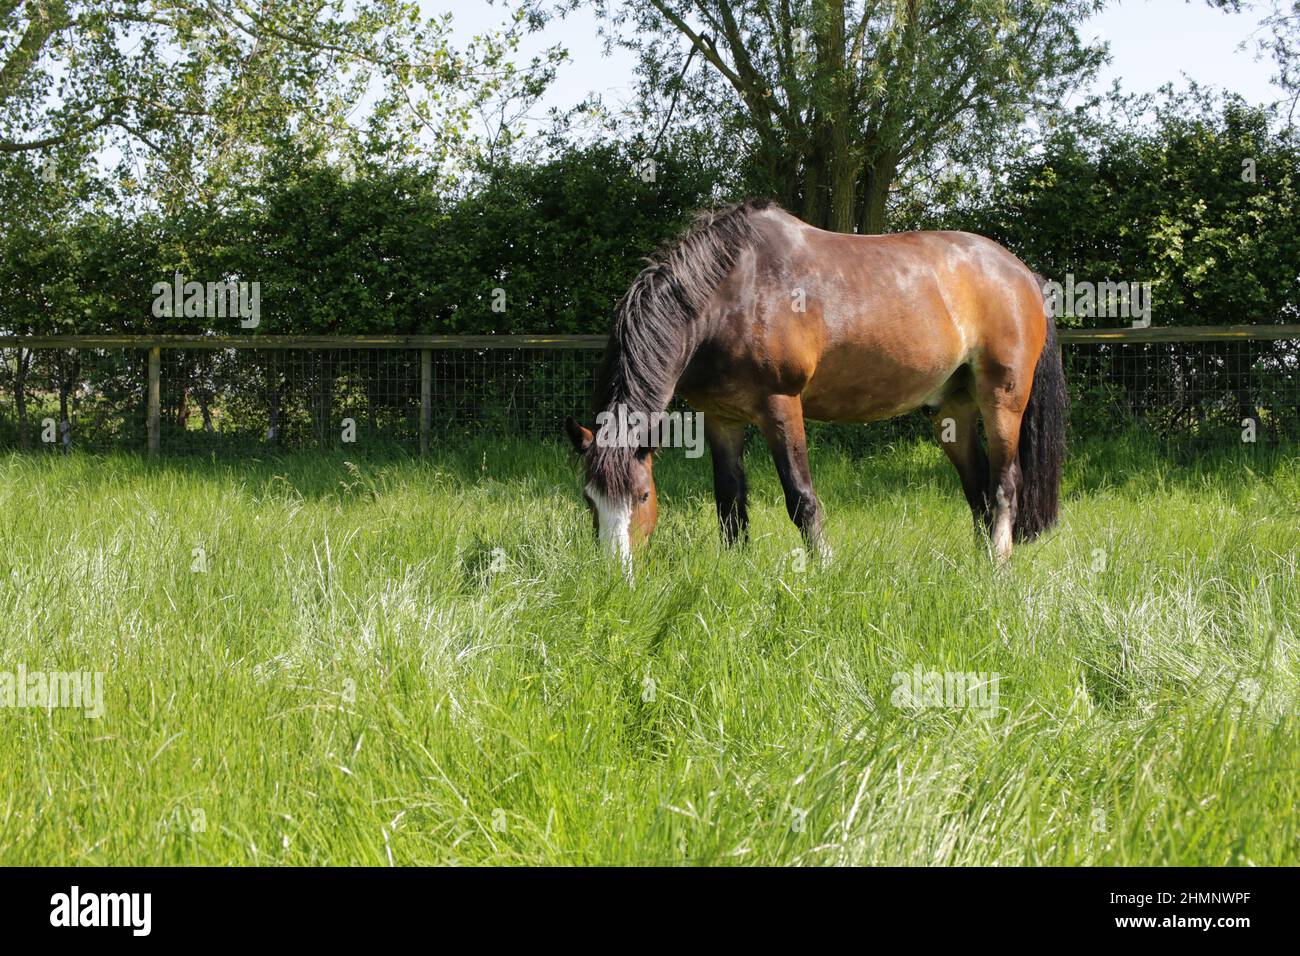 Horse grazing in a tree lined paddock Stock Photo